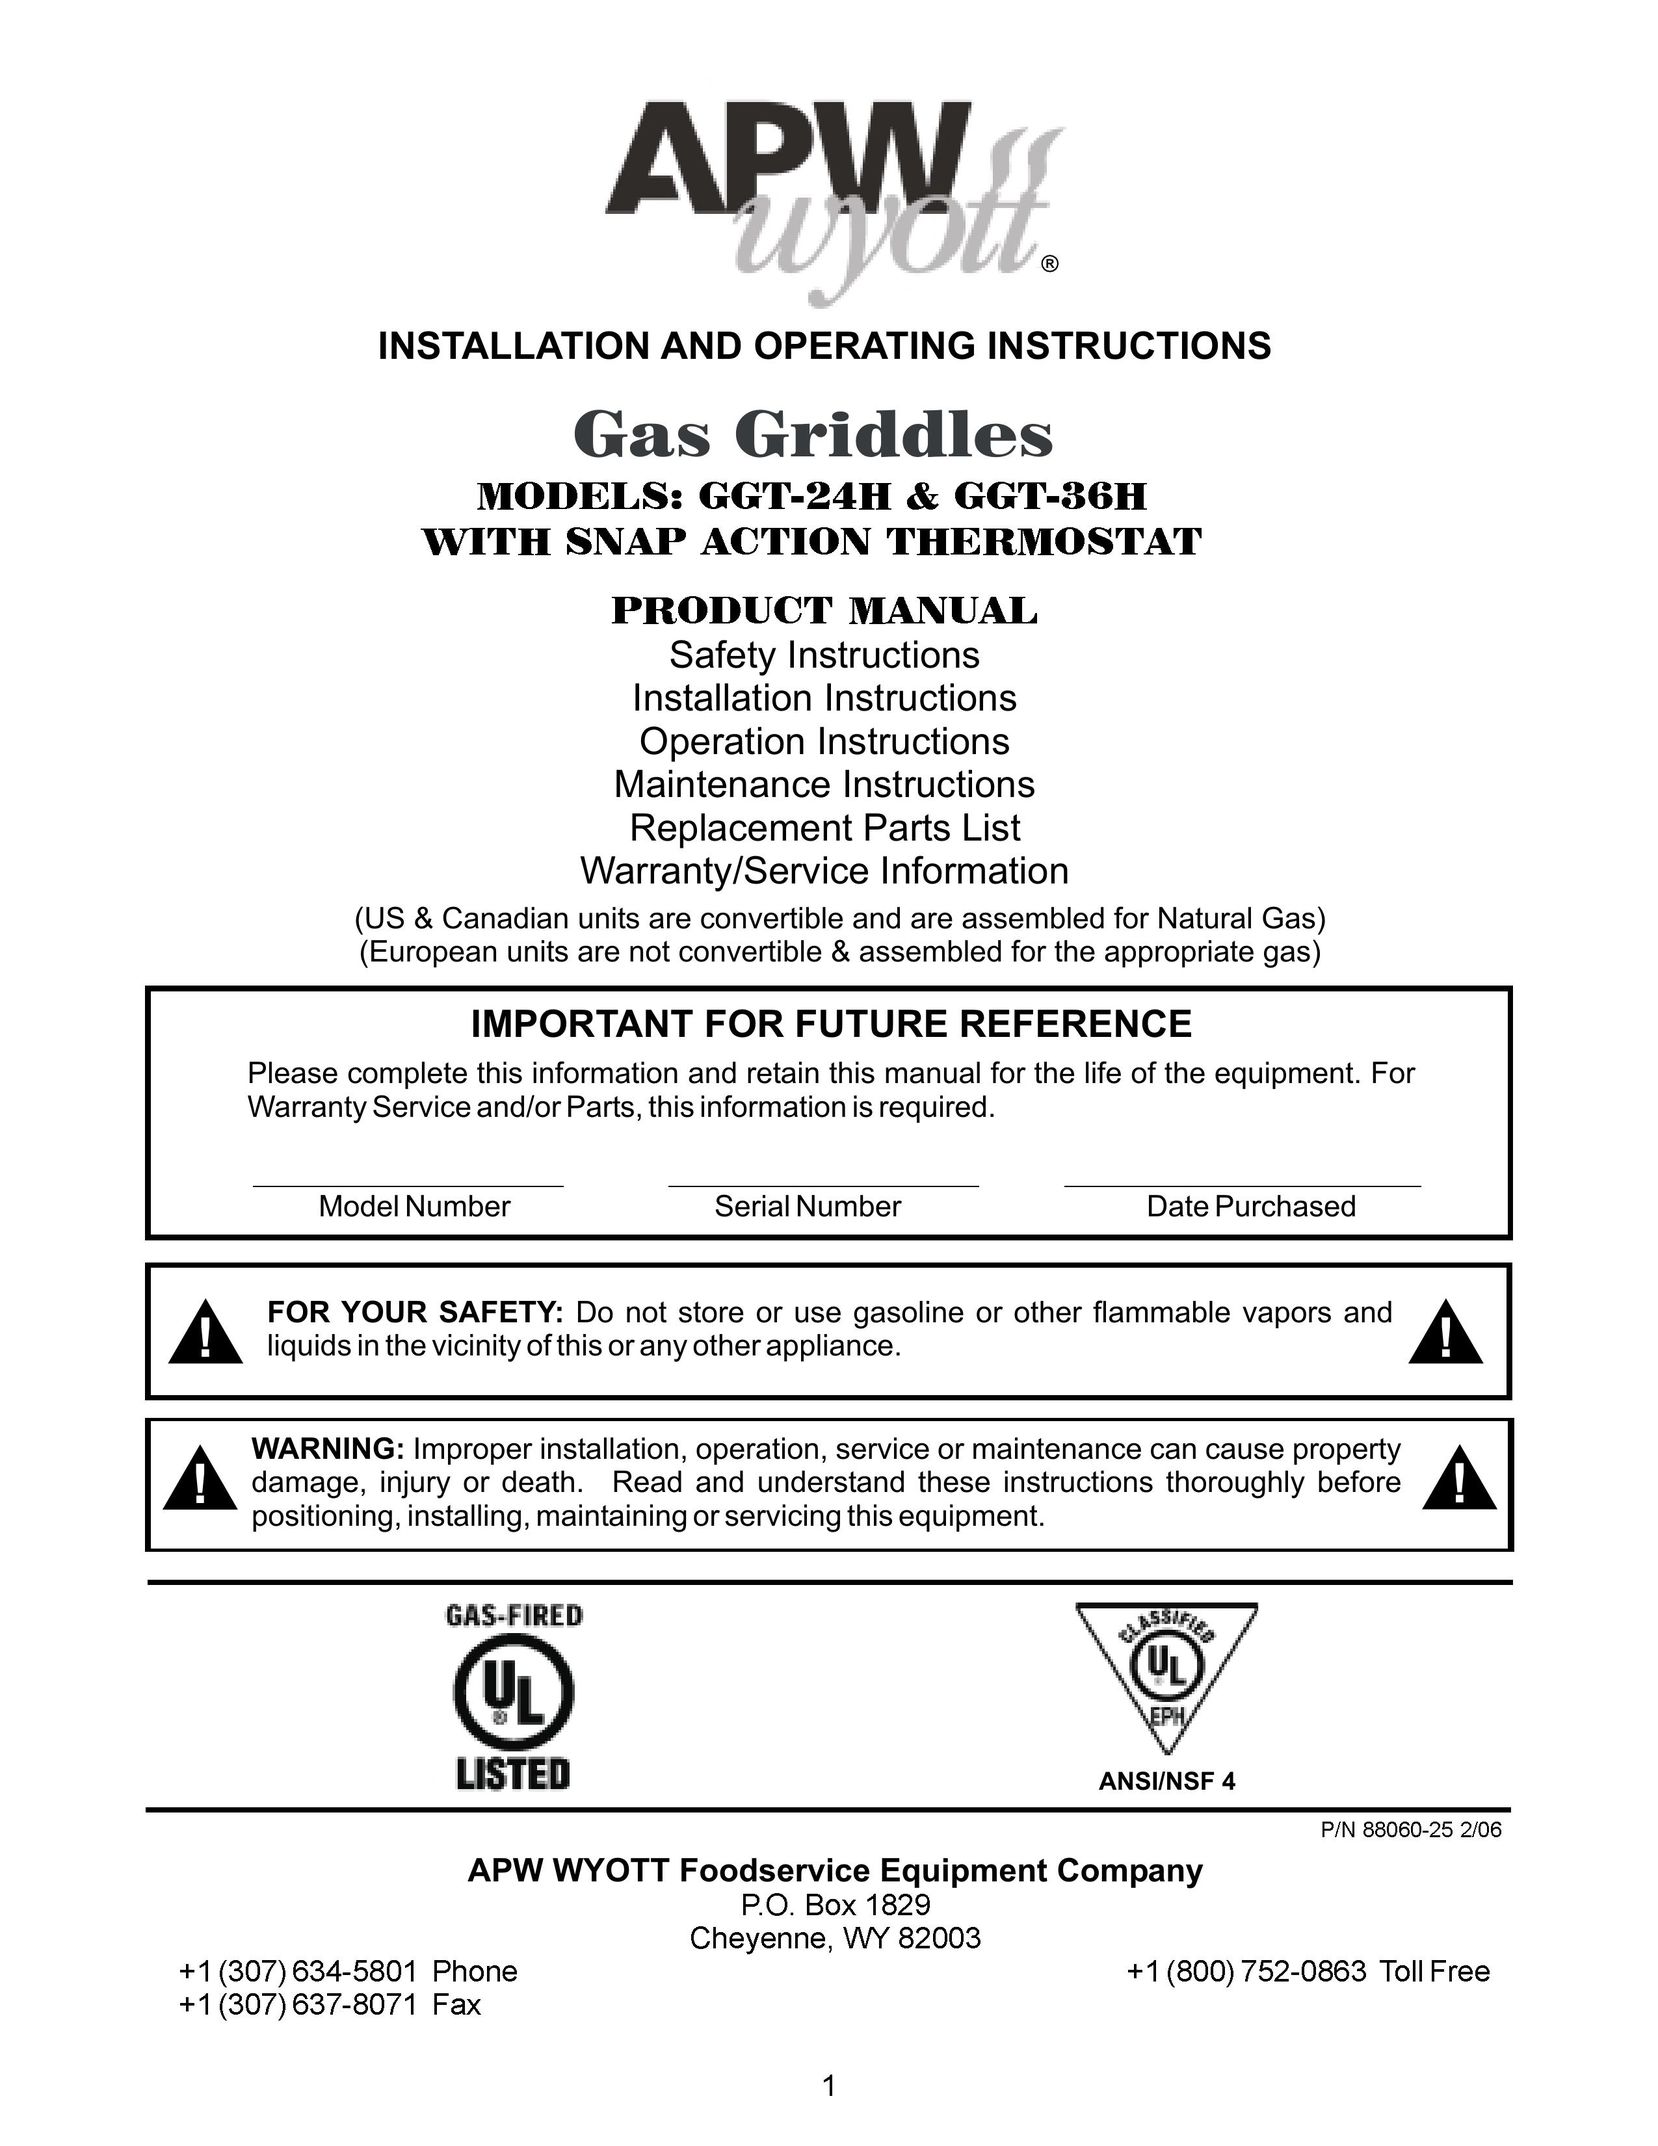 APW Wyott GGT-24H Griddle User Manual